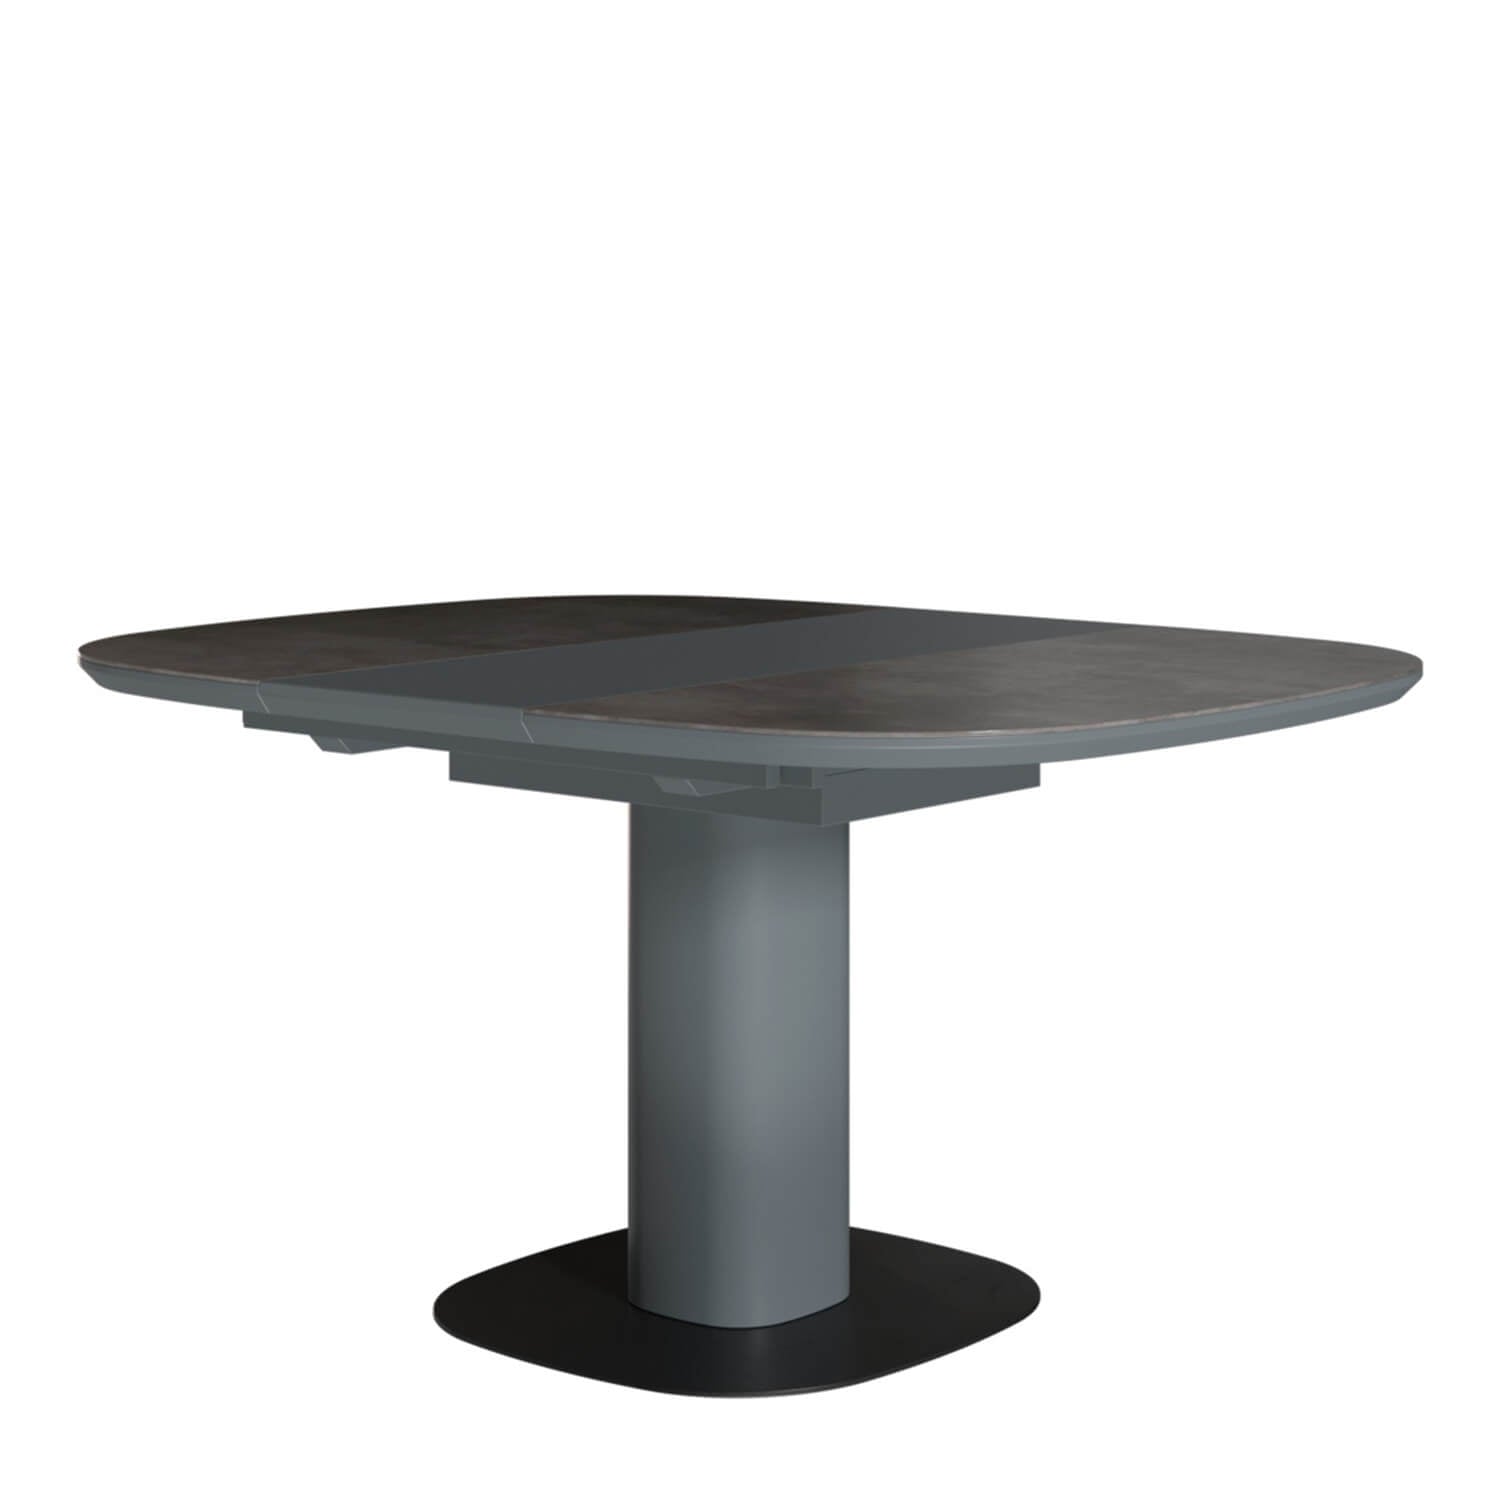 Avola extension dining table